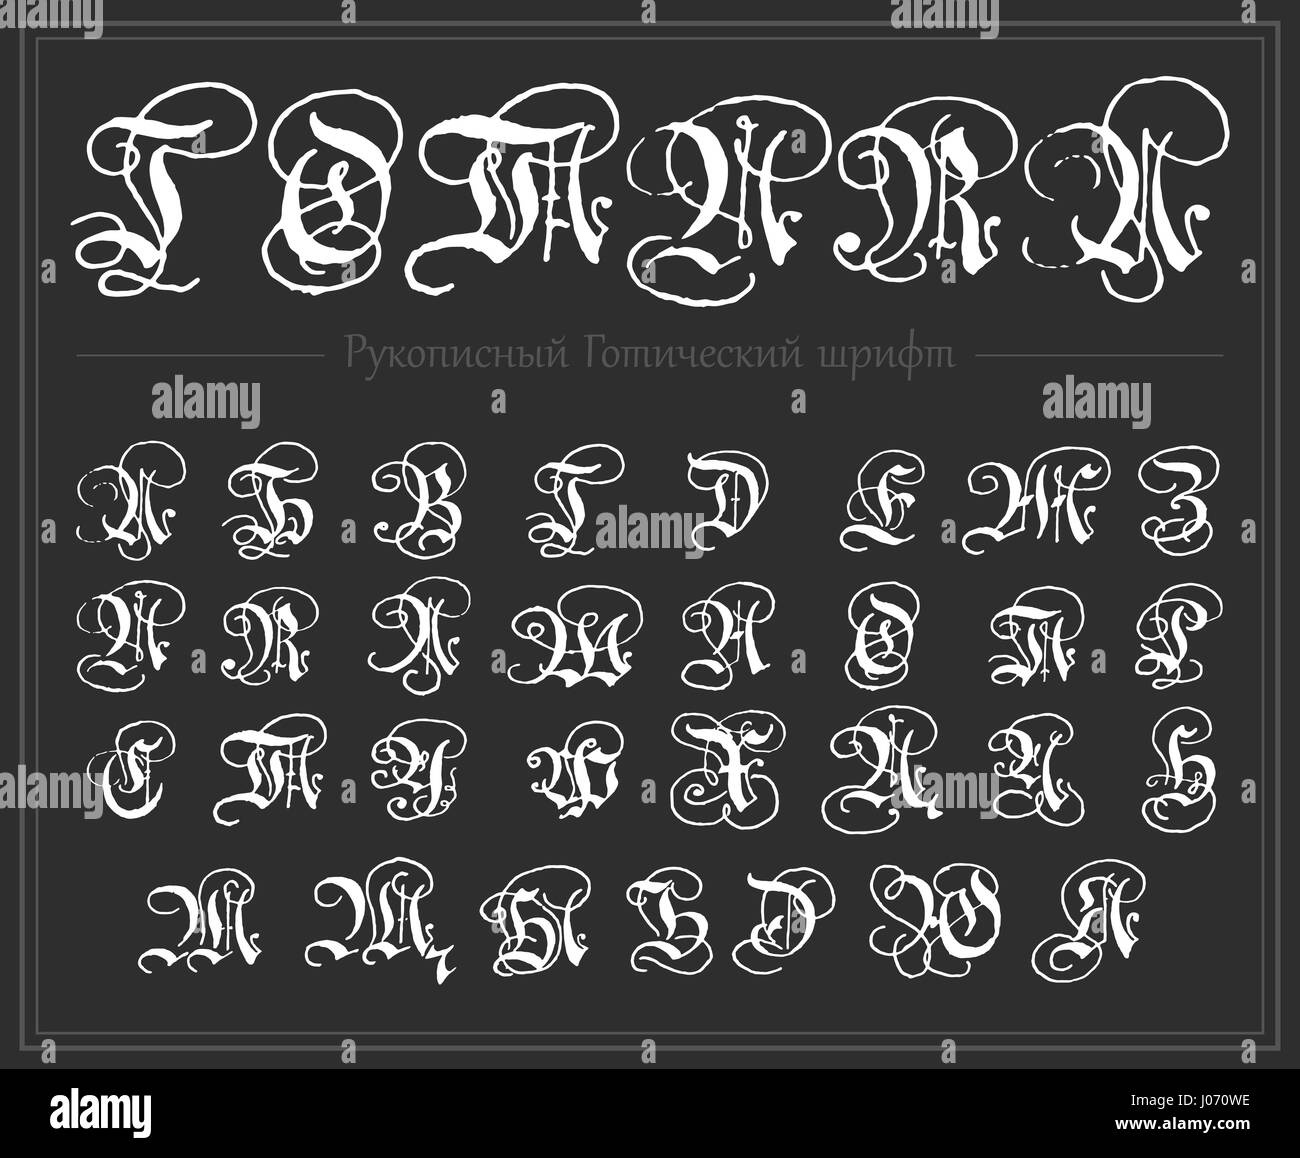 Russian alphabet, Gothic font, typeface, all Uppercase cyrillic letters, hand drawn blackletters Stock Vector